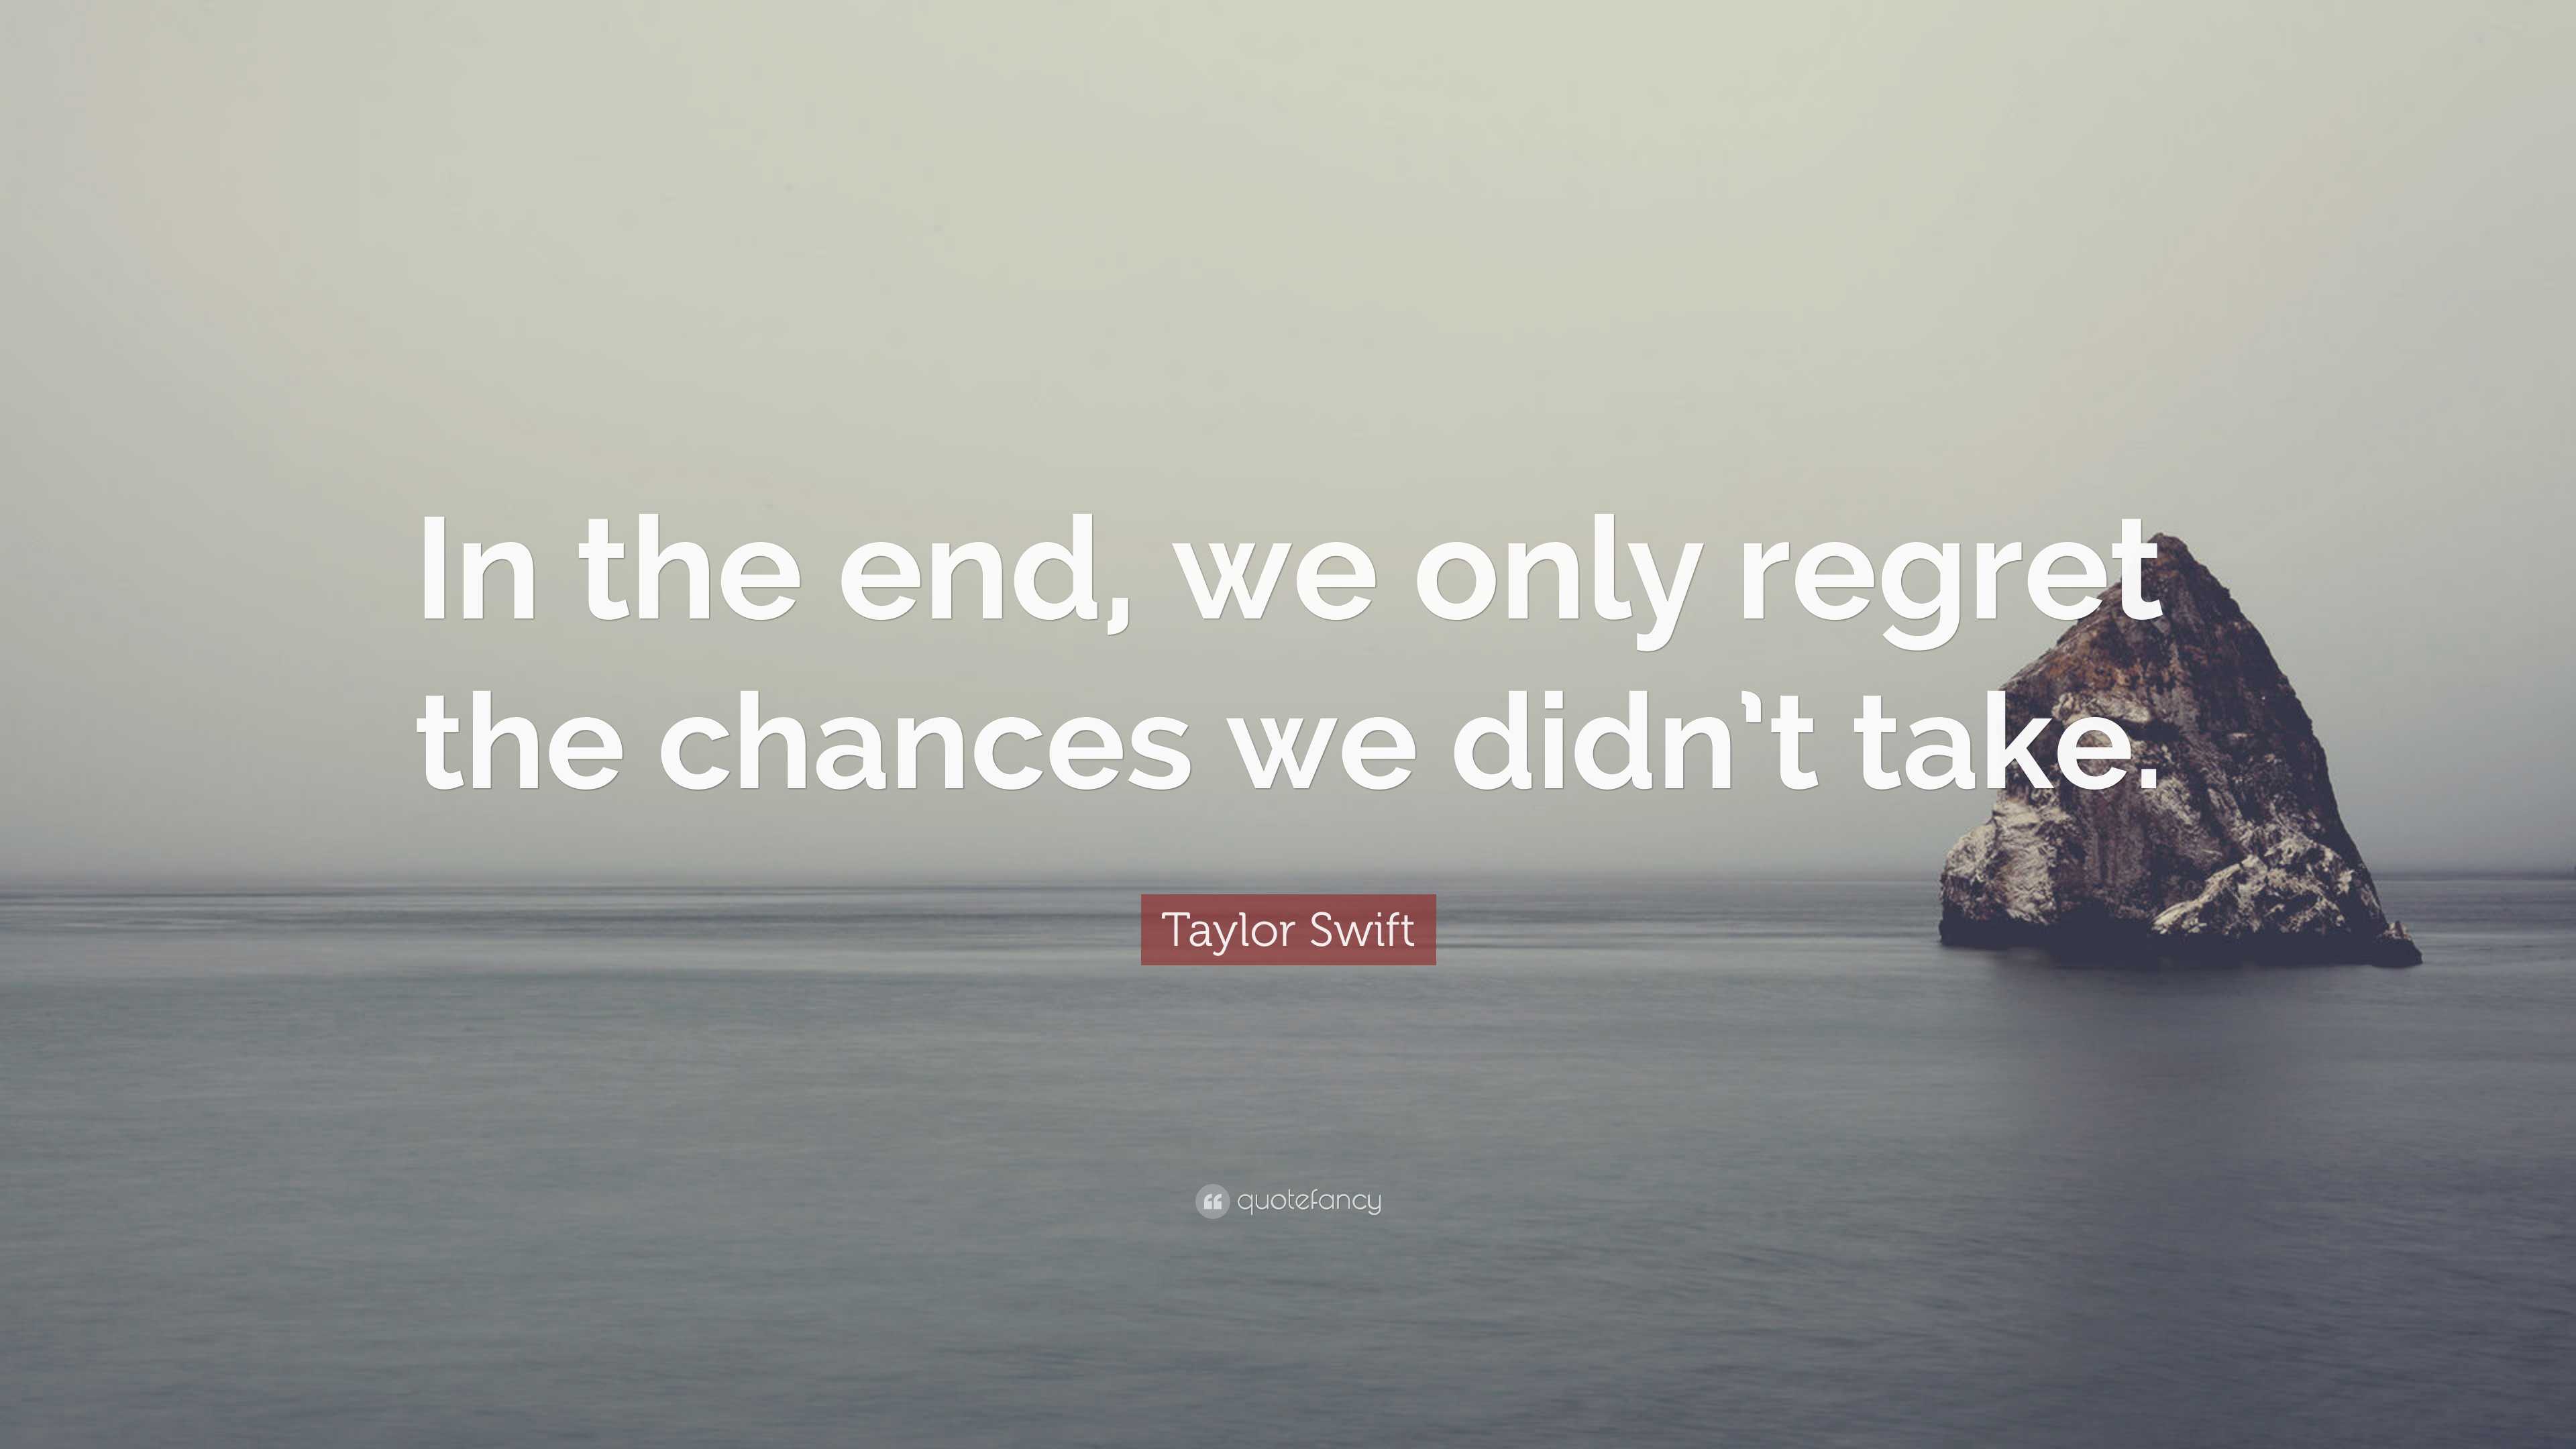 Taylor Swift Quote: “In the end, we only regret the chances we didn't take.”